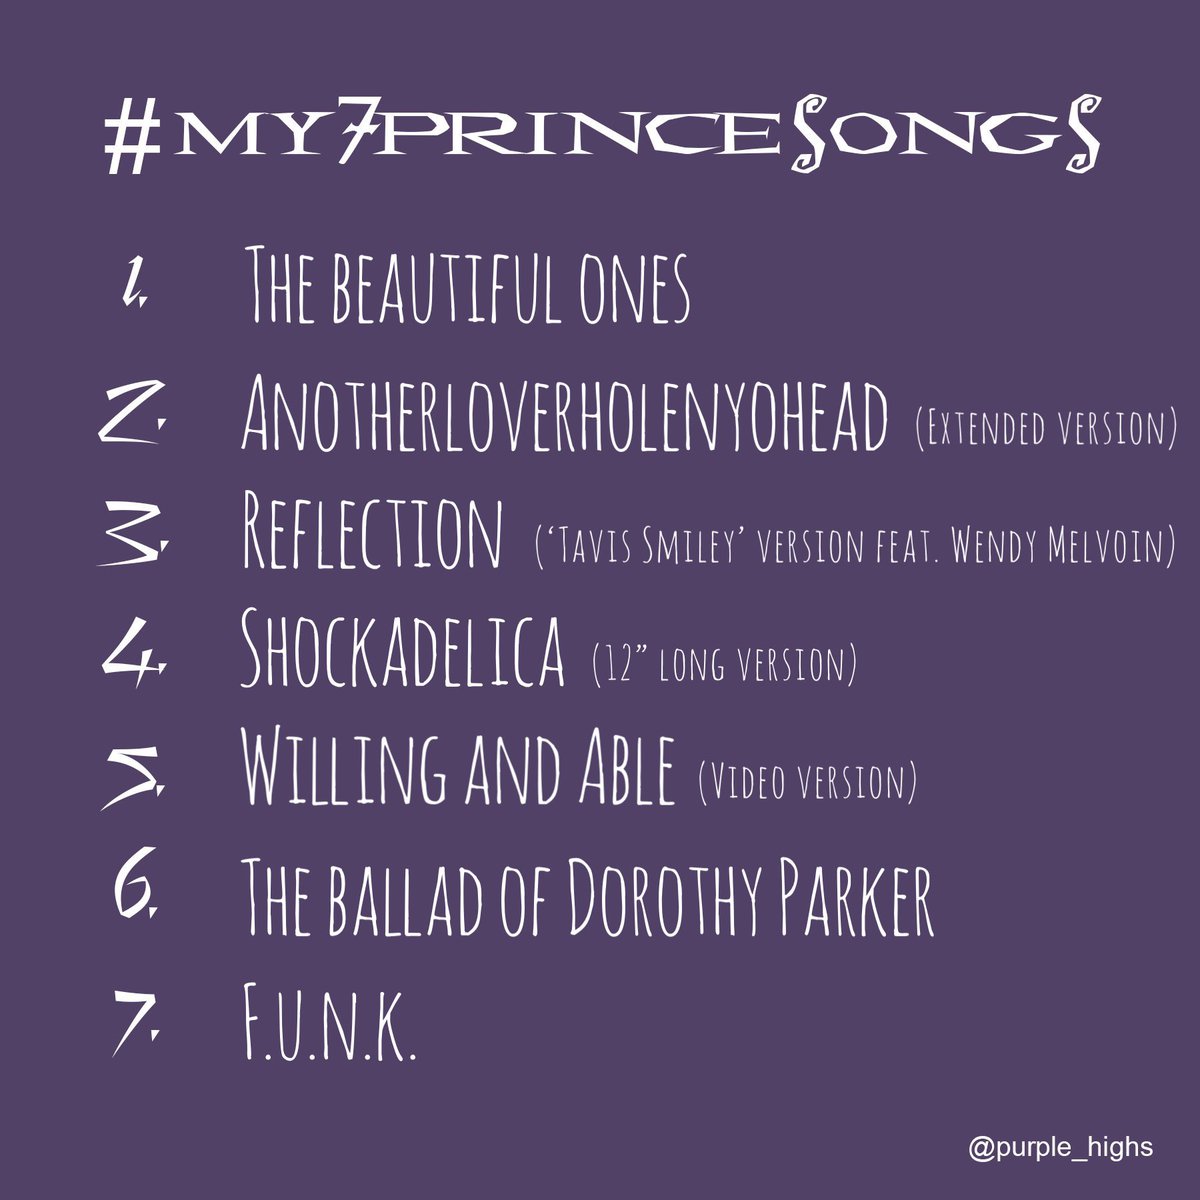 Celebrating the legacy of #PRINCE & honouring his memory by sharing his music with the world Here are 7 of my favourite Prince songs (Ask me again in a minute and I’d probably have 7 different ones) #My7PrinceSongs #Prince4Ever 🎼💜🎶 Thanks to @PurpleHighs for the template 💜